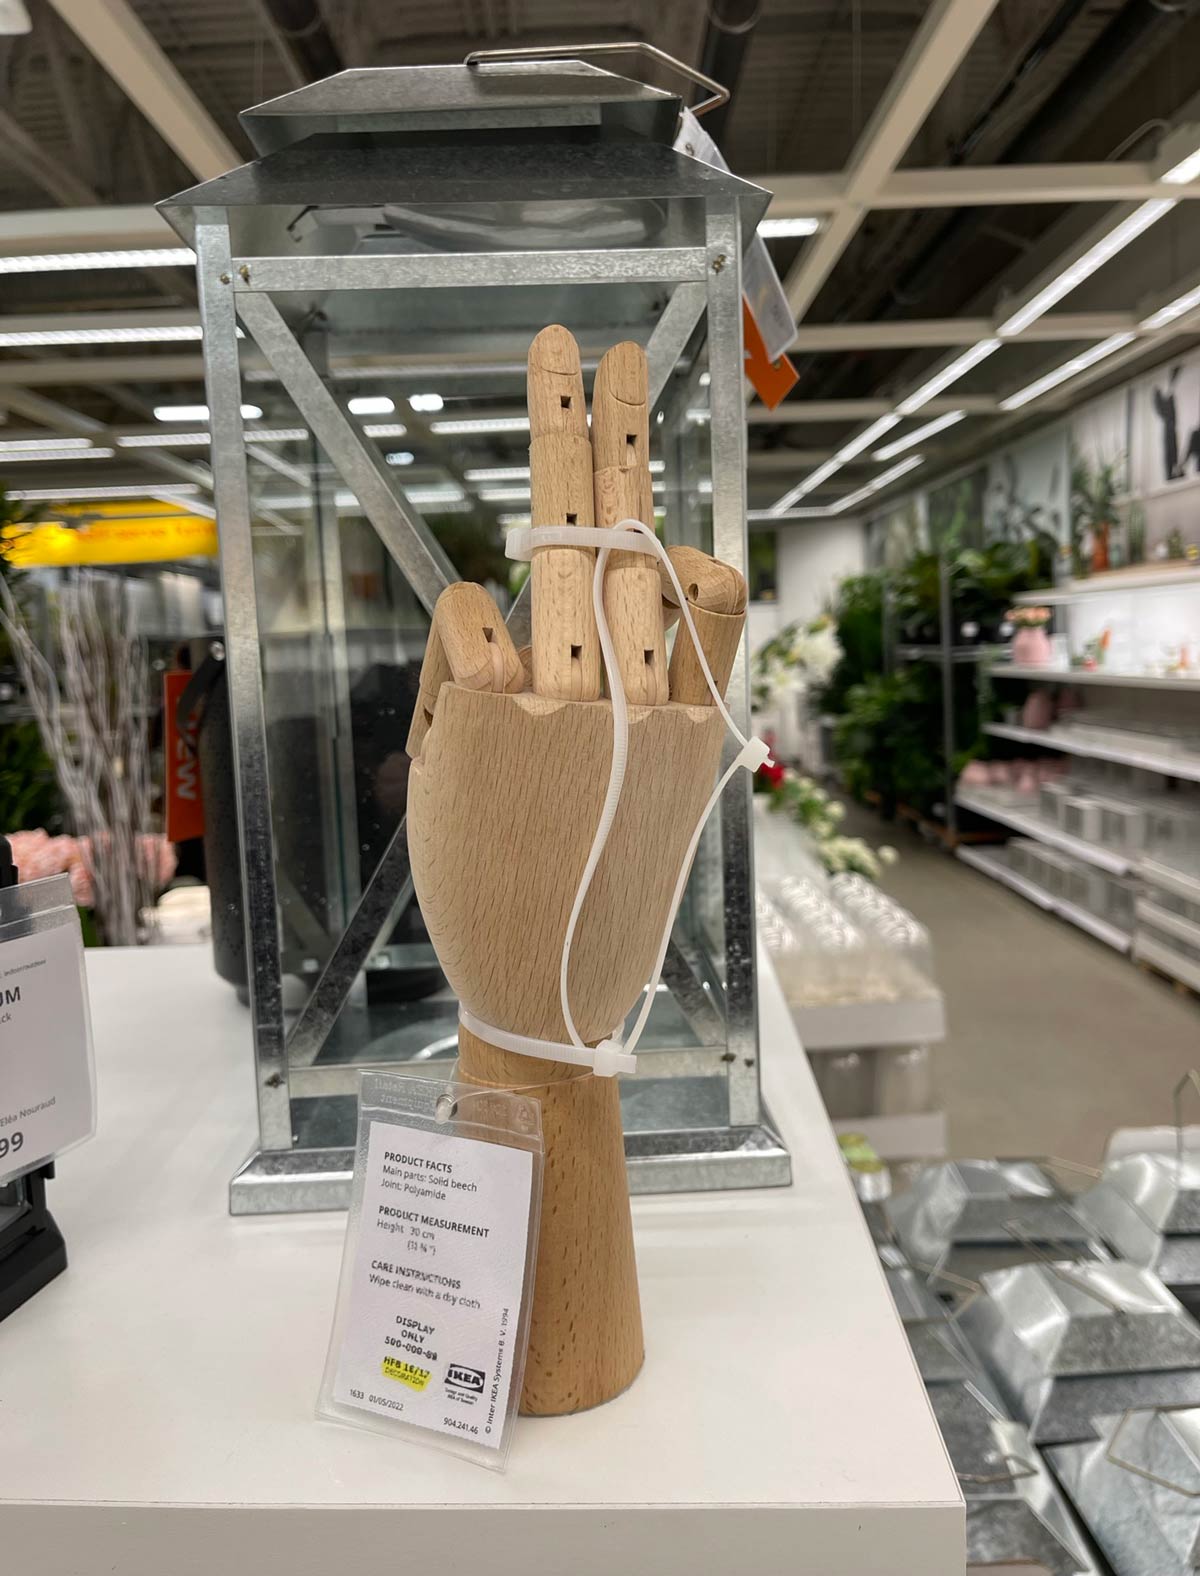 IKEA preventing the middle finger